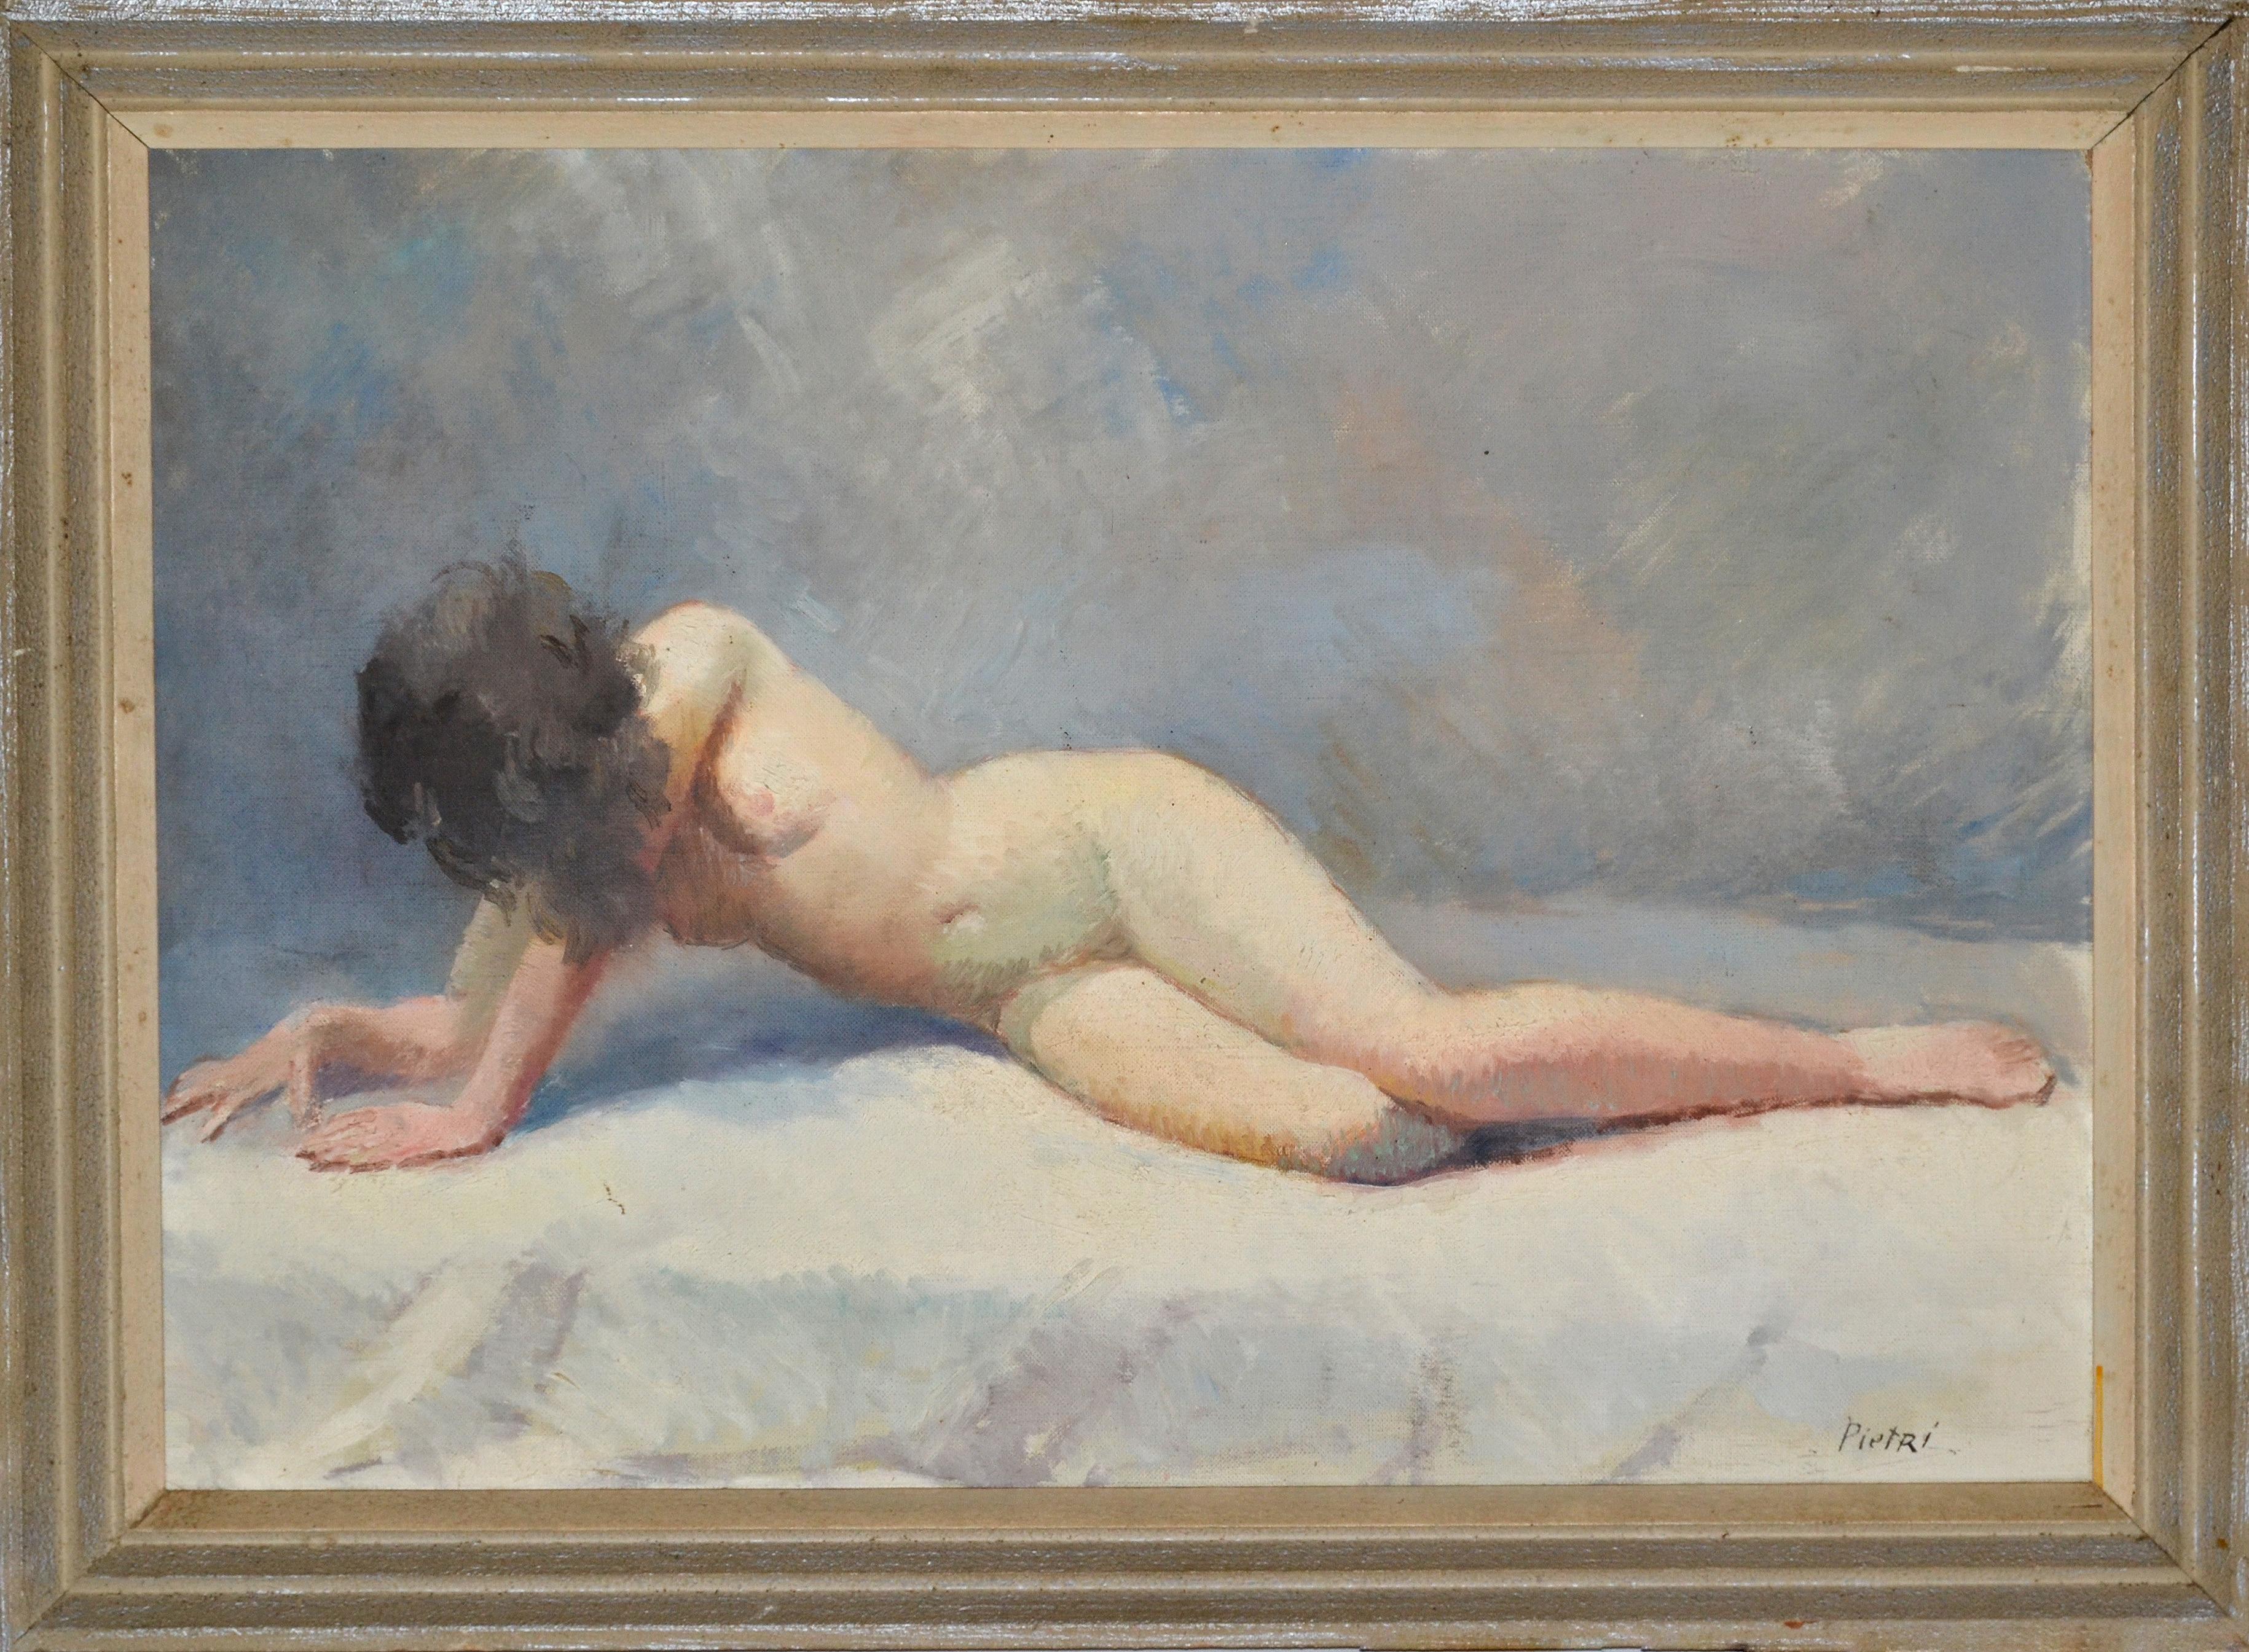 Signed Pietri French Mid-Century Modern framed oil painting resting nude woman.
Traditionally those paintings were hung above the bed in a master bedroom in France.
Original signature by Artist Pietri.
Size of painting: 17.25 x 25 inches.